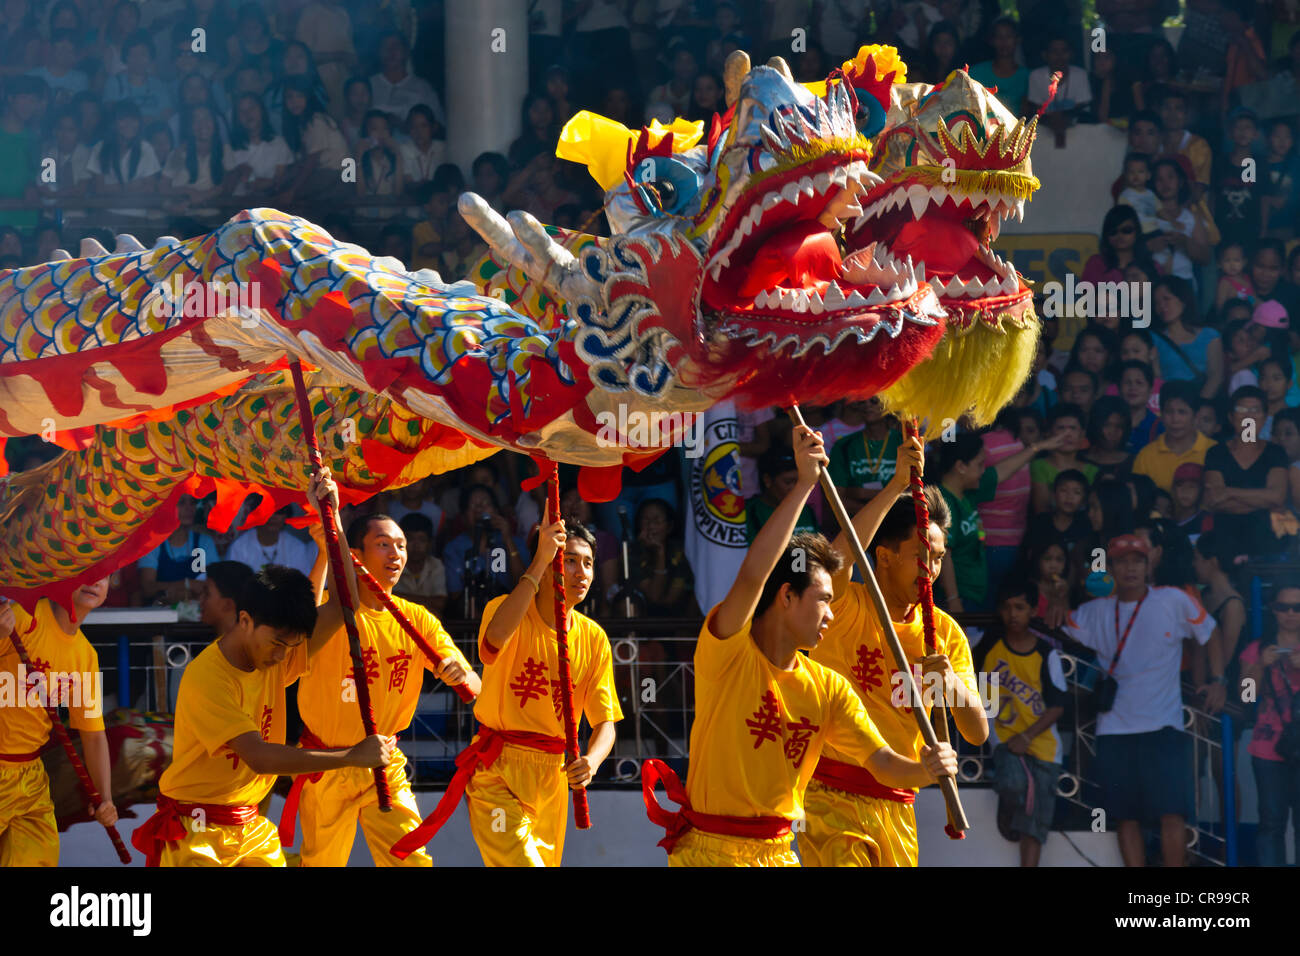 Dragon dance performance celebrating Chinese New Year, City of Iloilo, Philippines Stock Photo